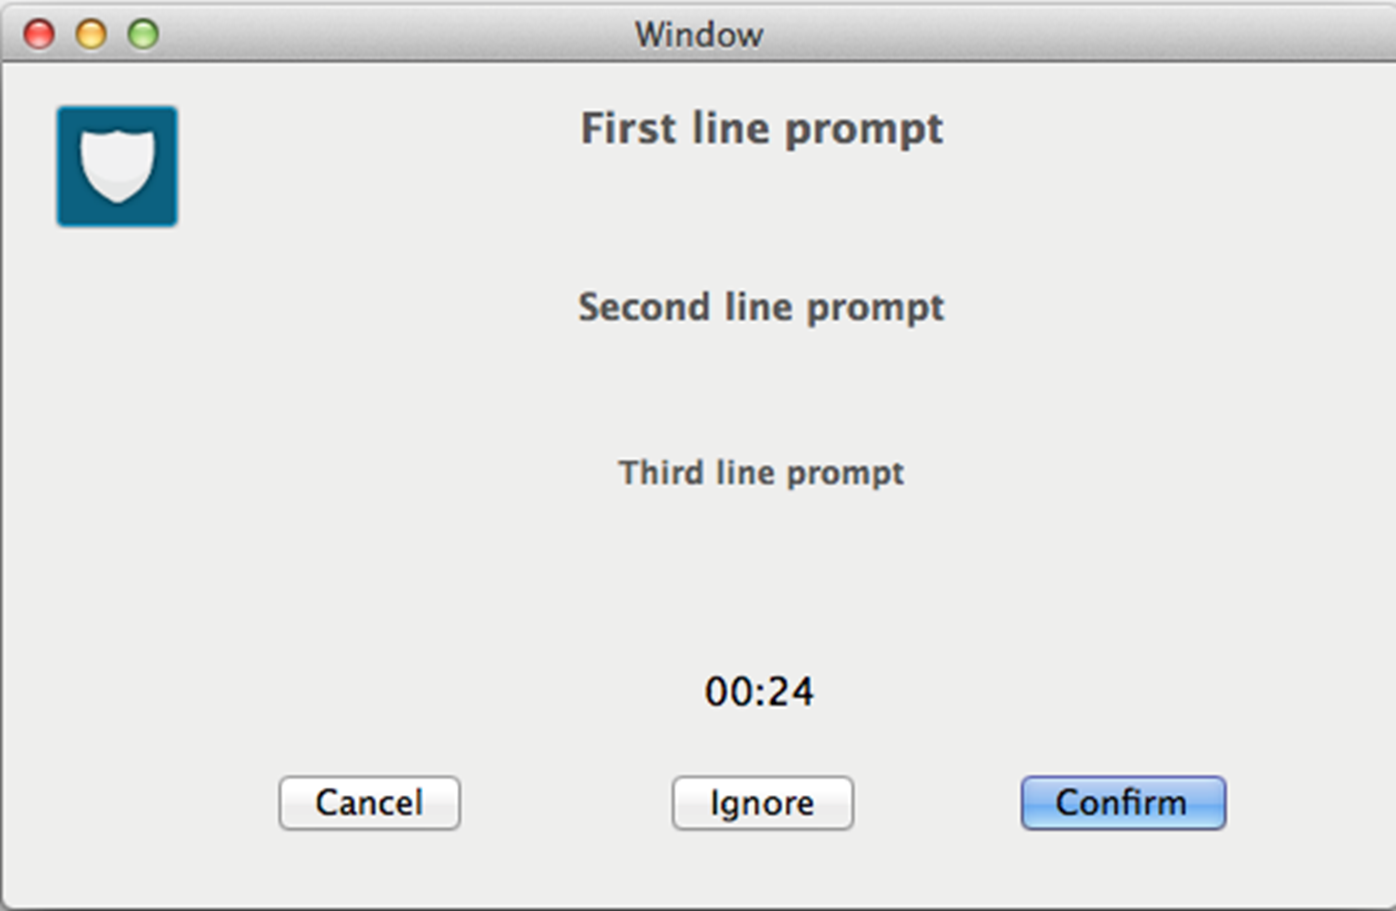 This partial screenshot shows the Confirm condition's Message prompt on the macOS platform.